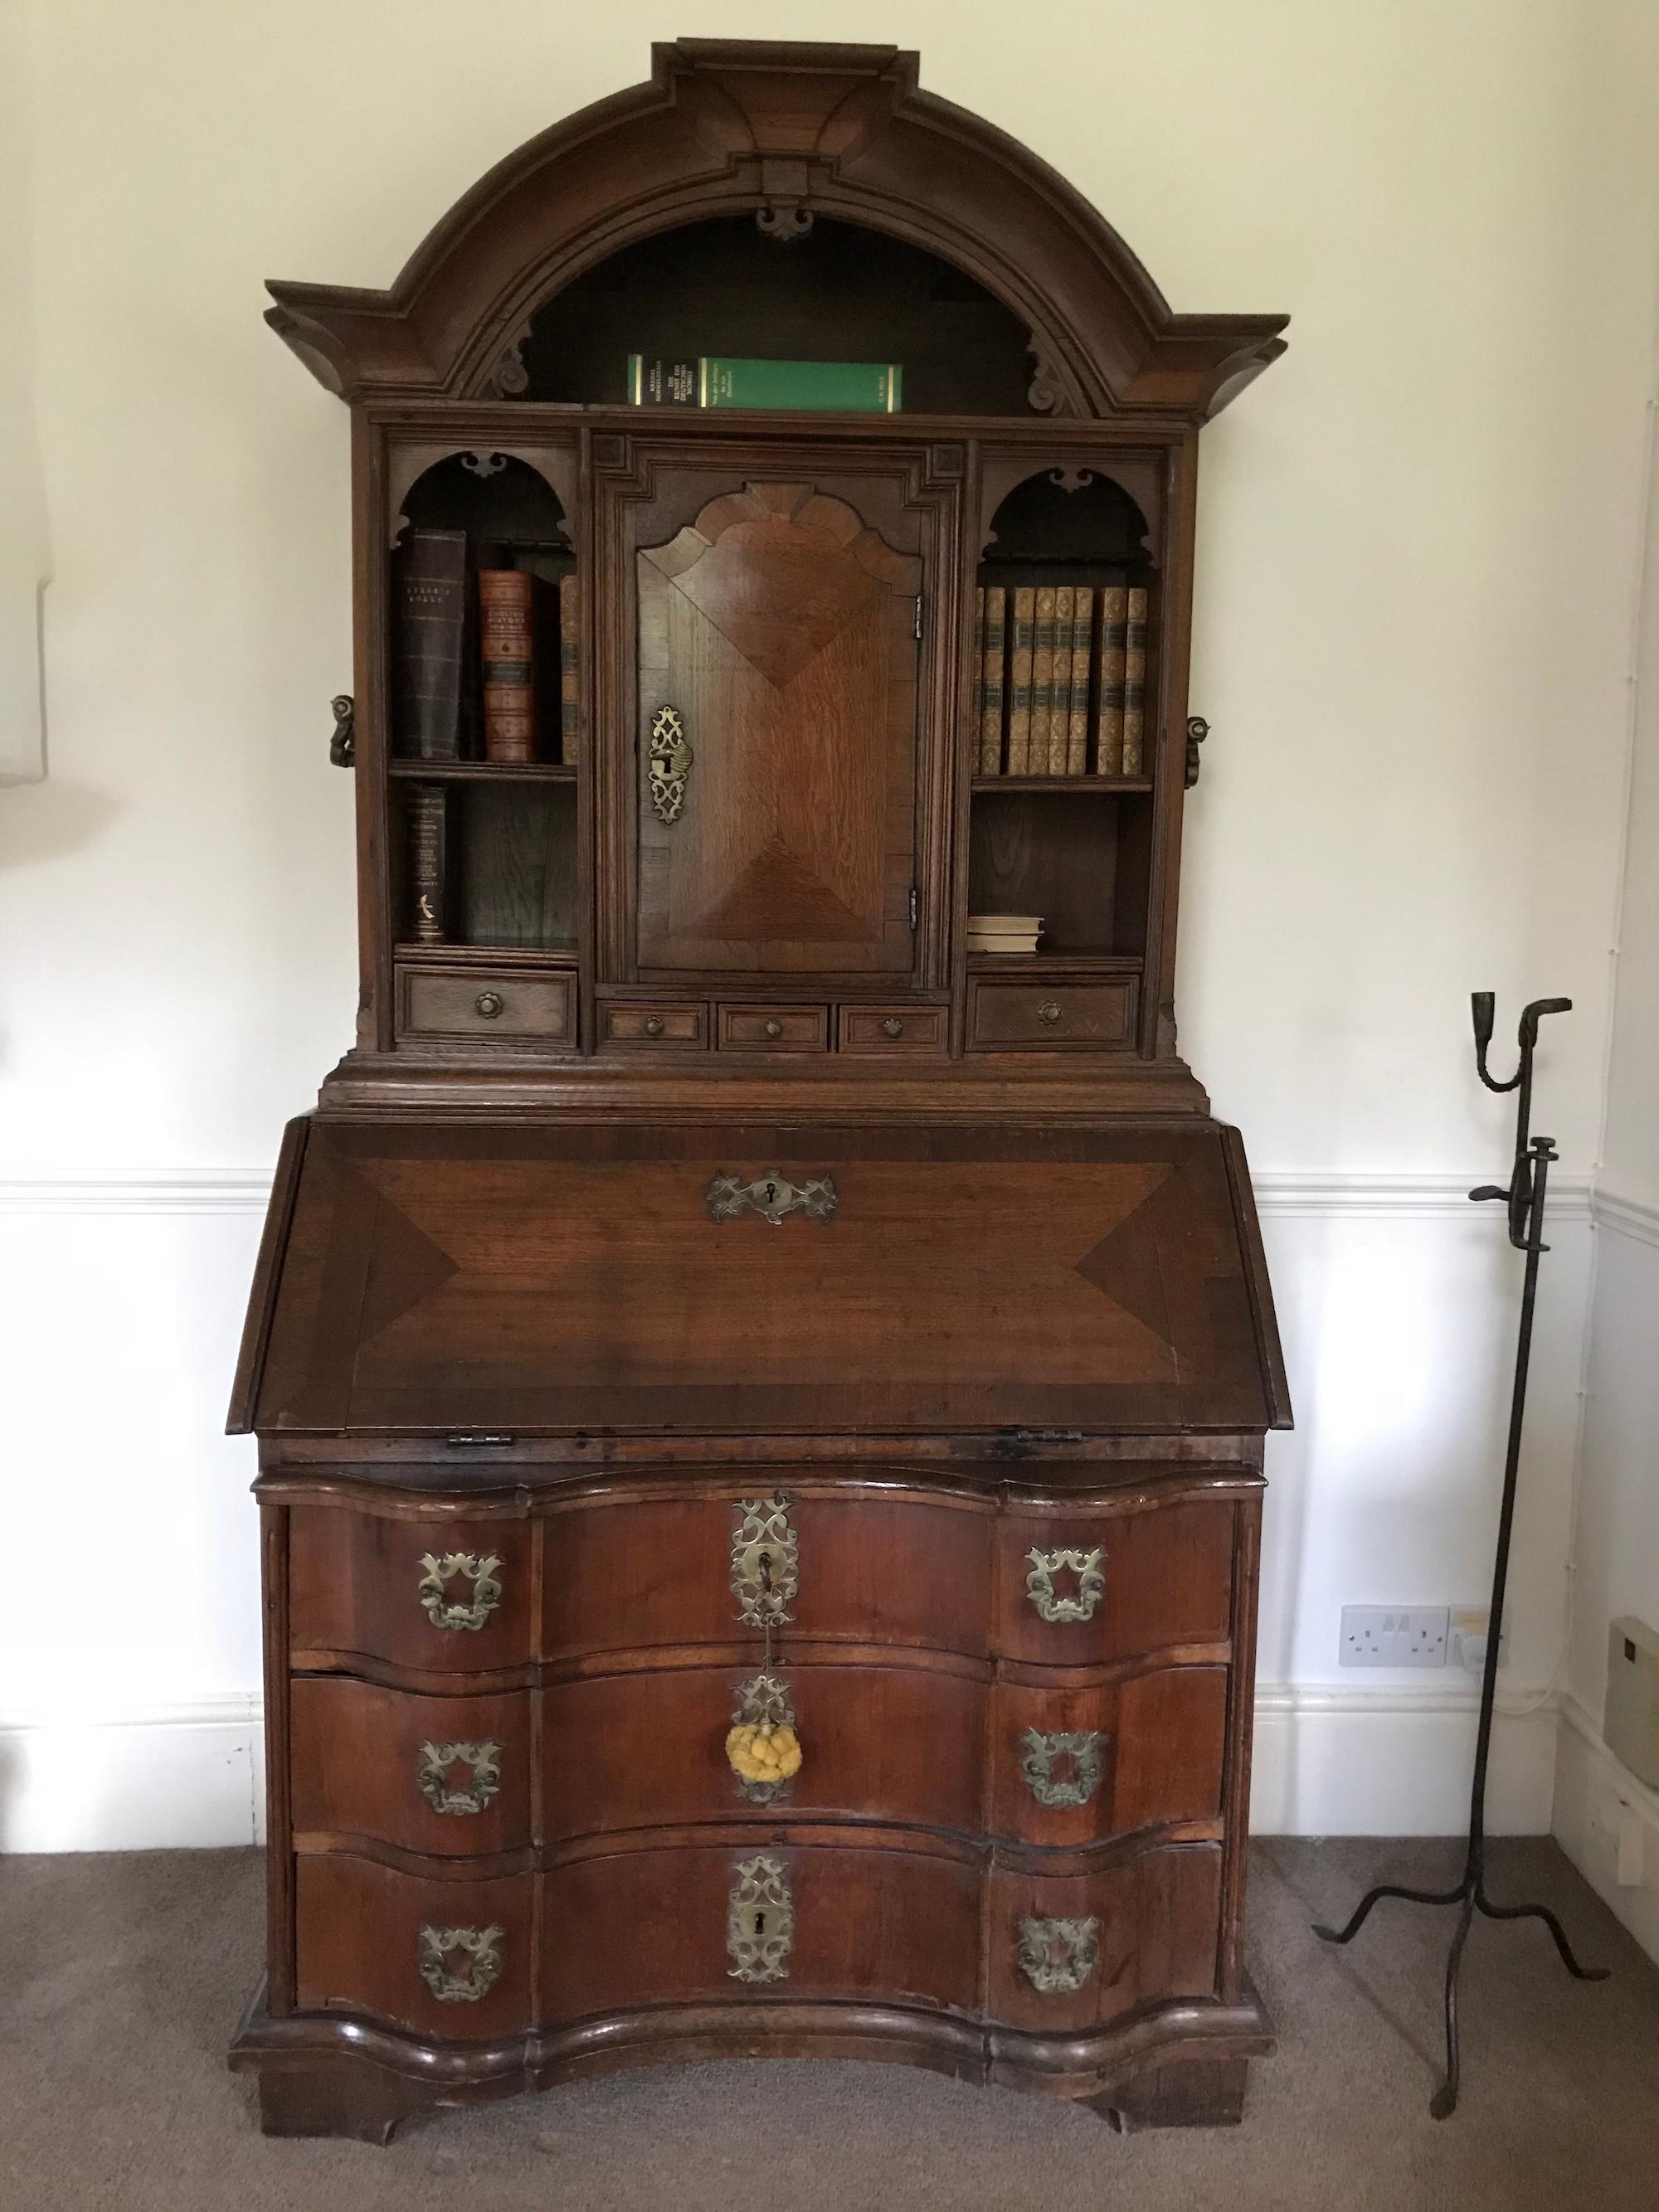 A large, museum quality, 18th century, German, oak bureau bookcase with a serpentine front, original brassware and working locks
As fine an example of this model of German cabinet furniture as can be found, in exceptional original condition

-